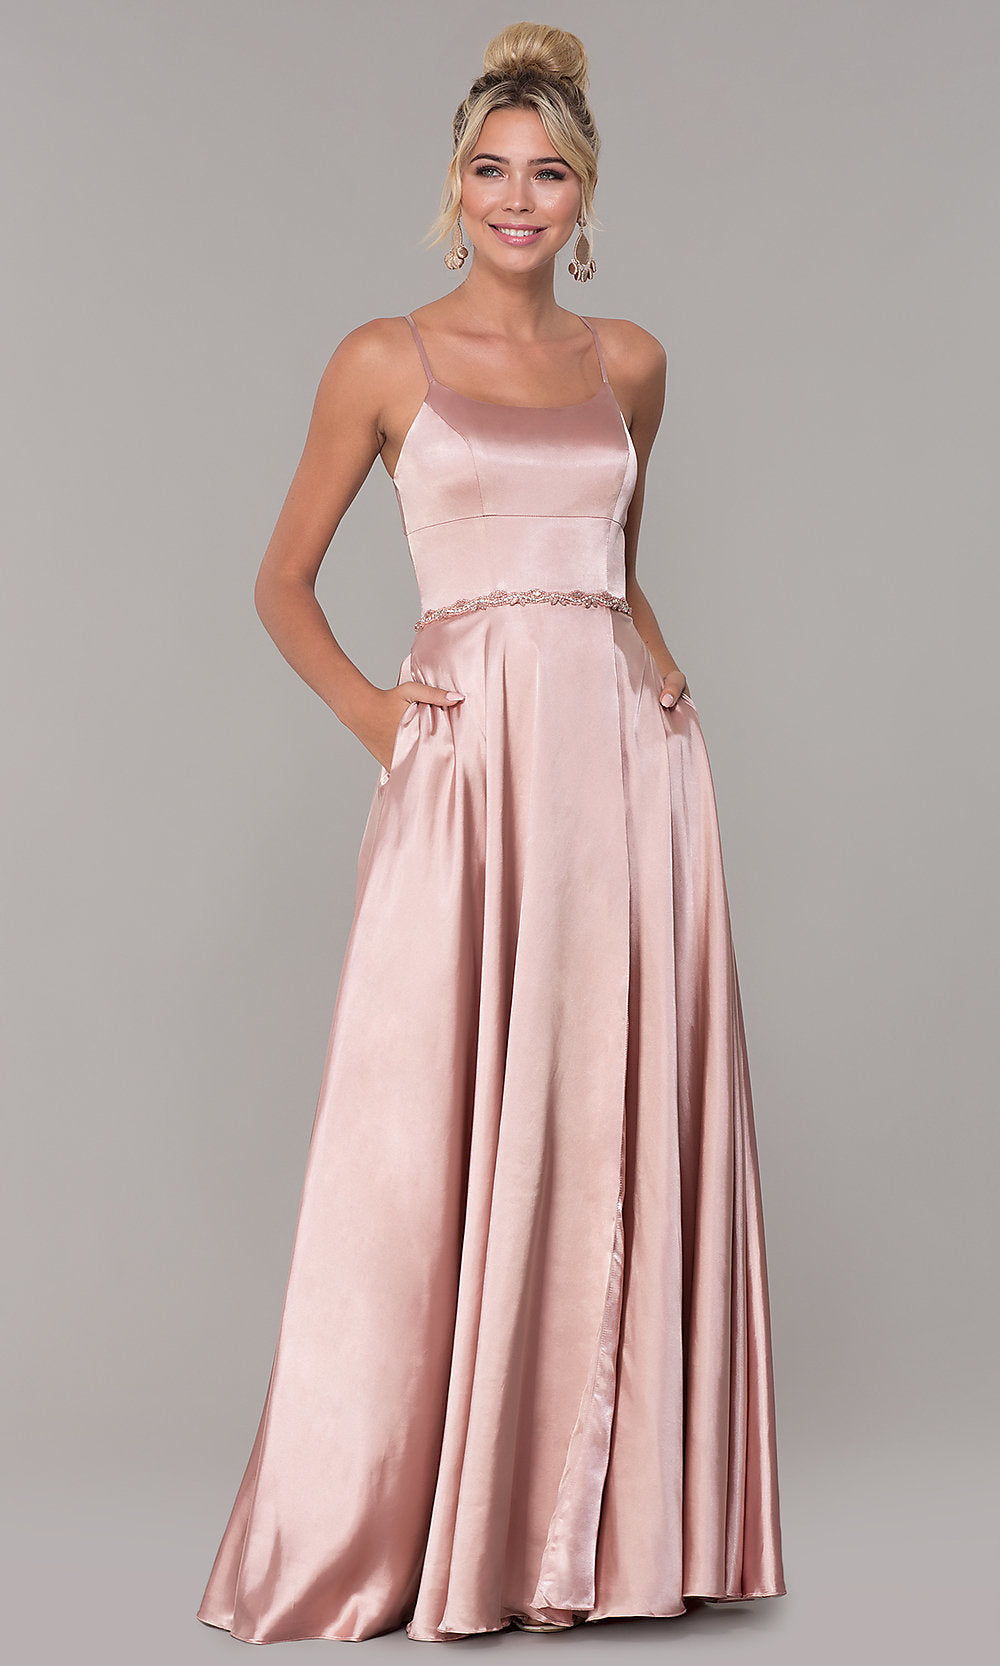  Long Faux-Wrap Satin Prom Dress with Slit